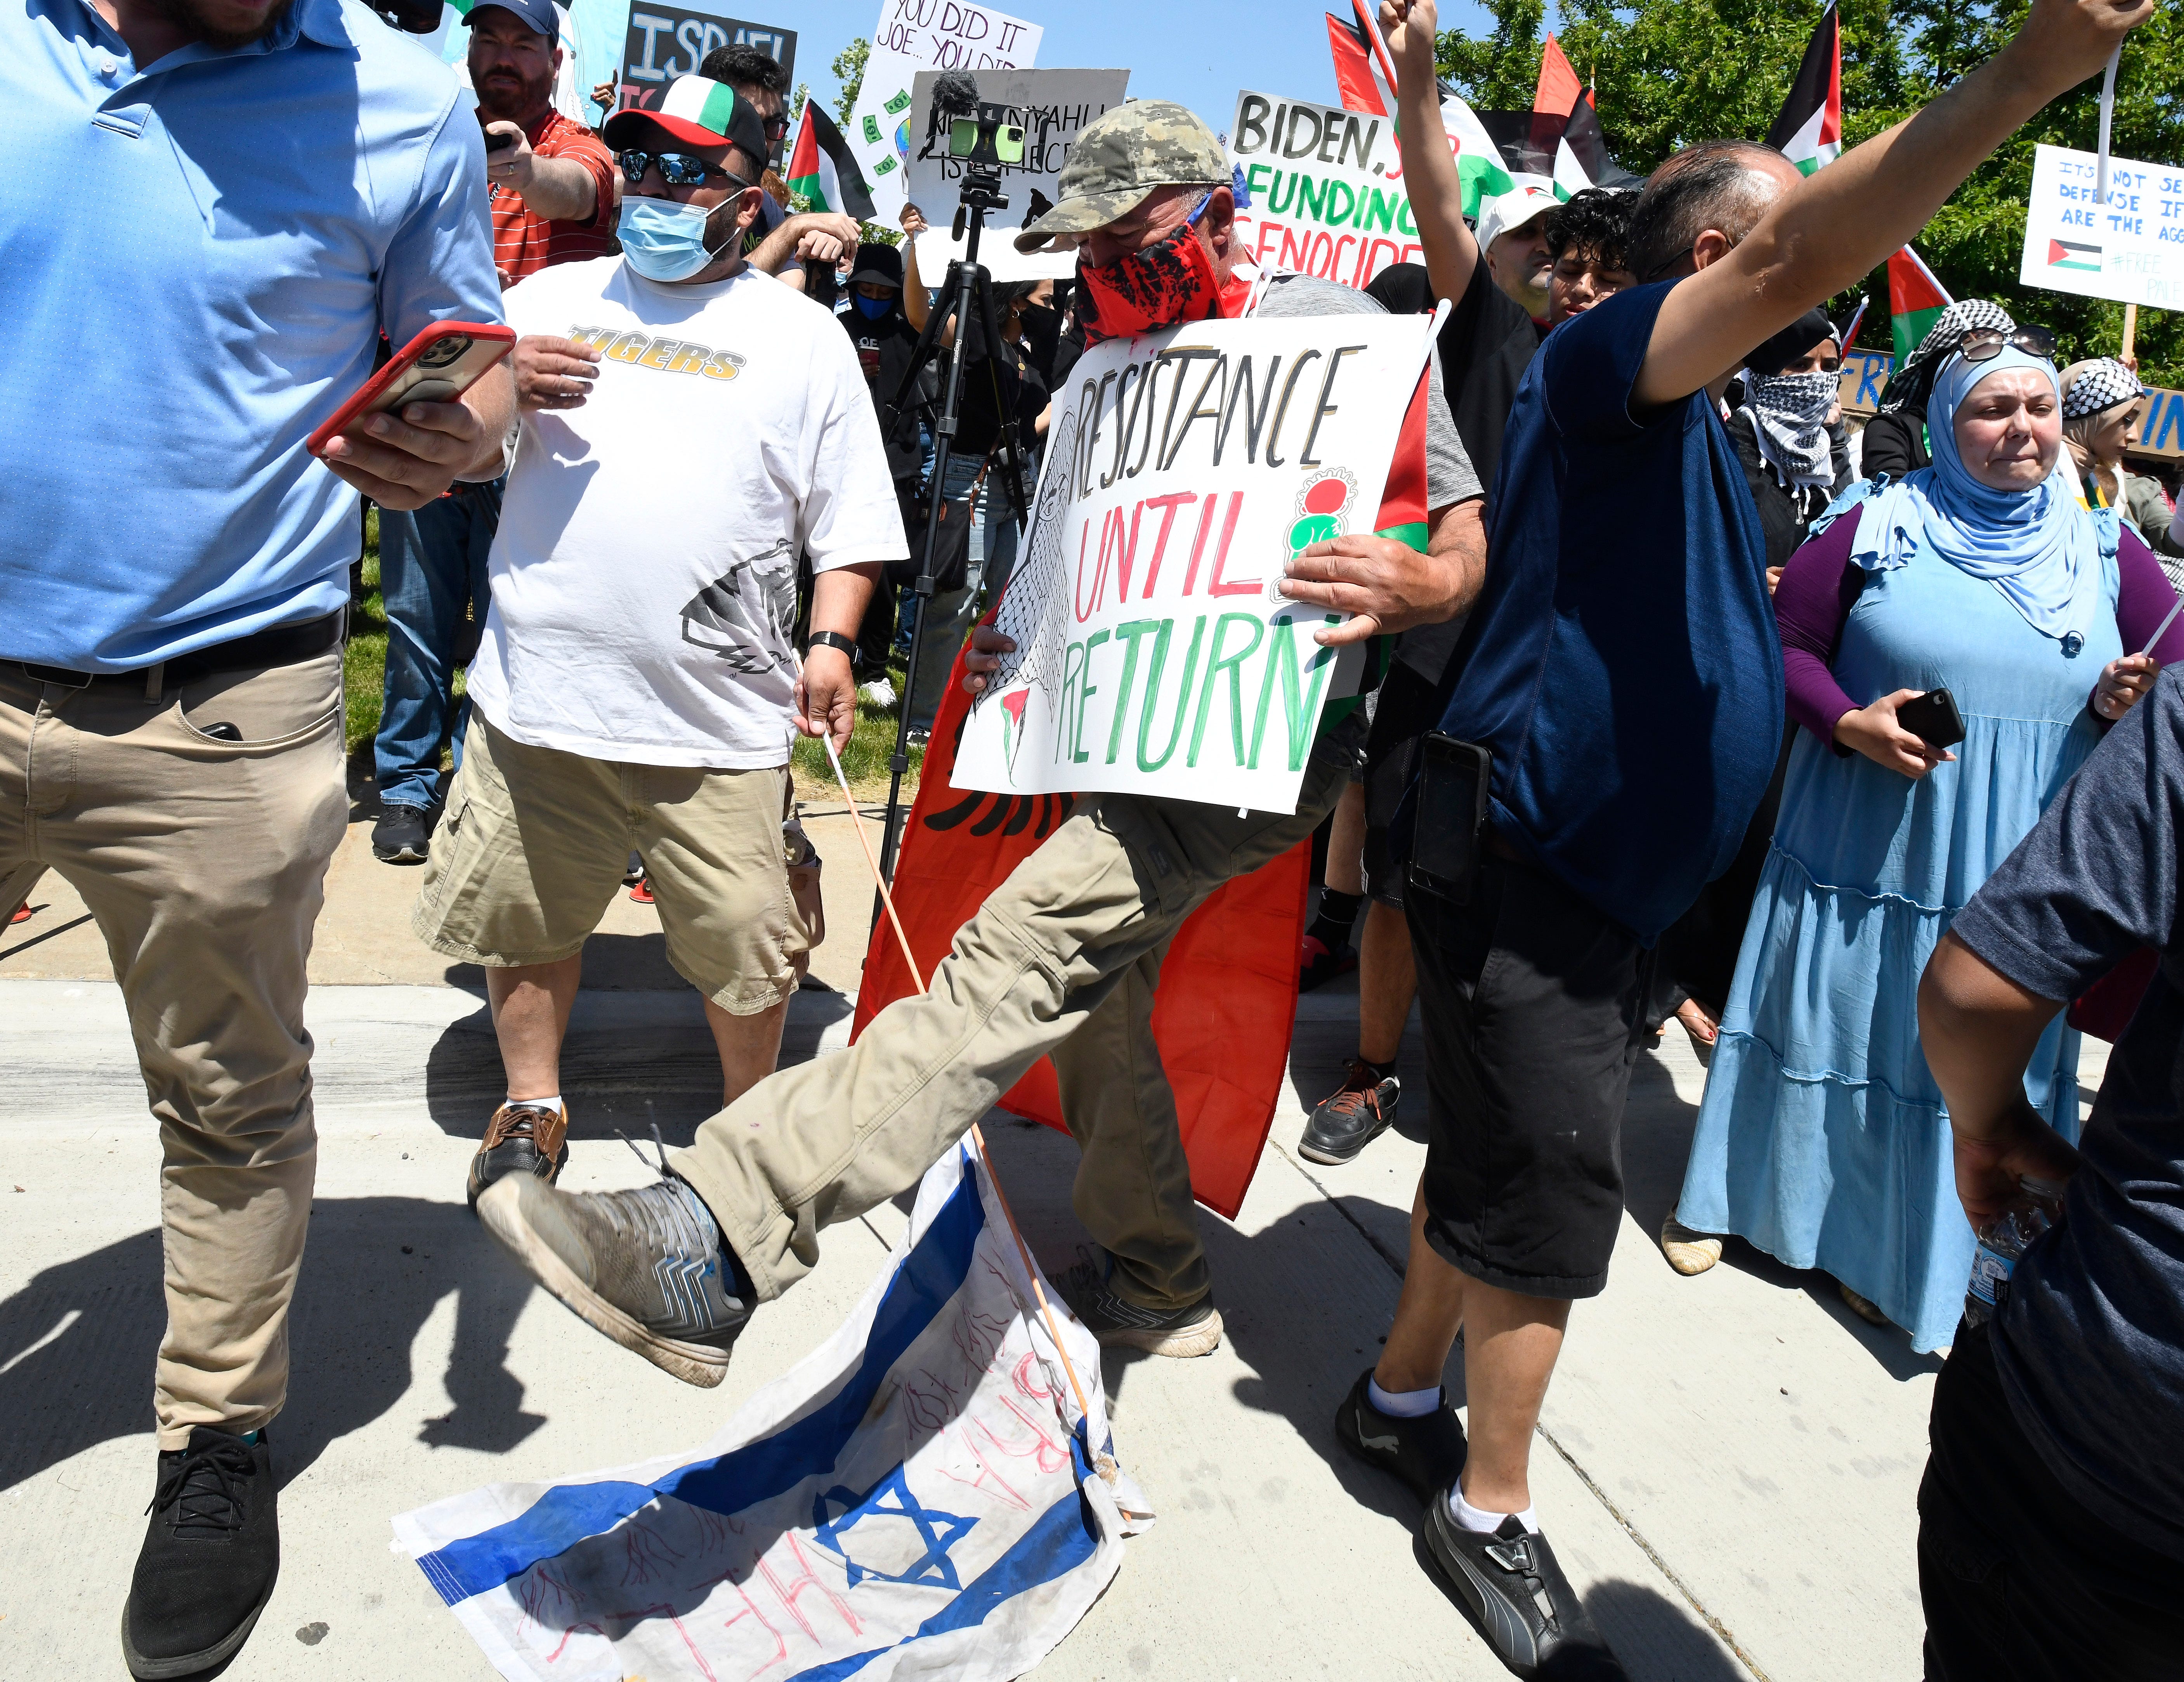 A man stomps on an small Israeli flag during a Palestinian protest and march, at the same time President Joe Biden is visiting in another part of Dearborn, Michigan on May 18, 2021.